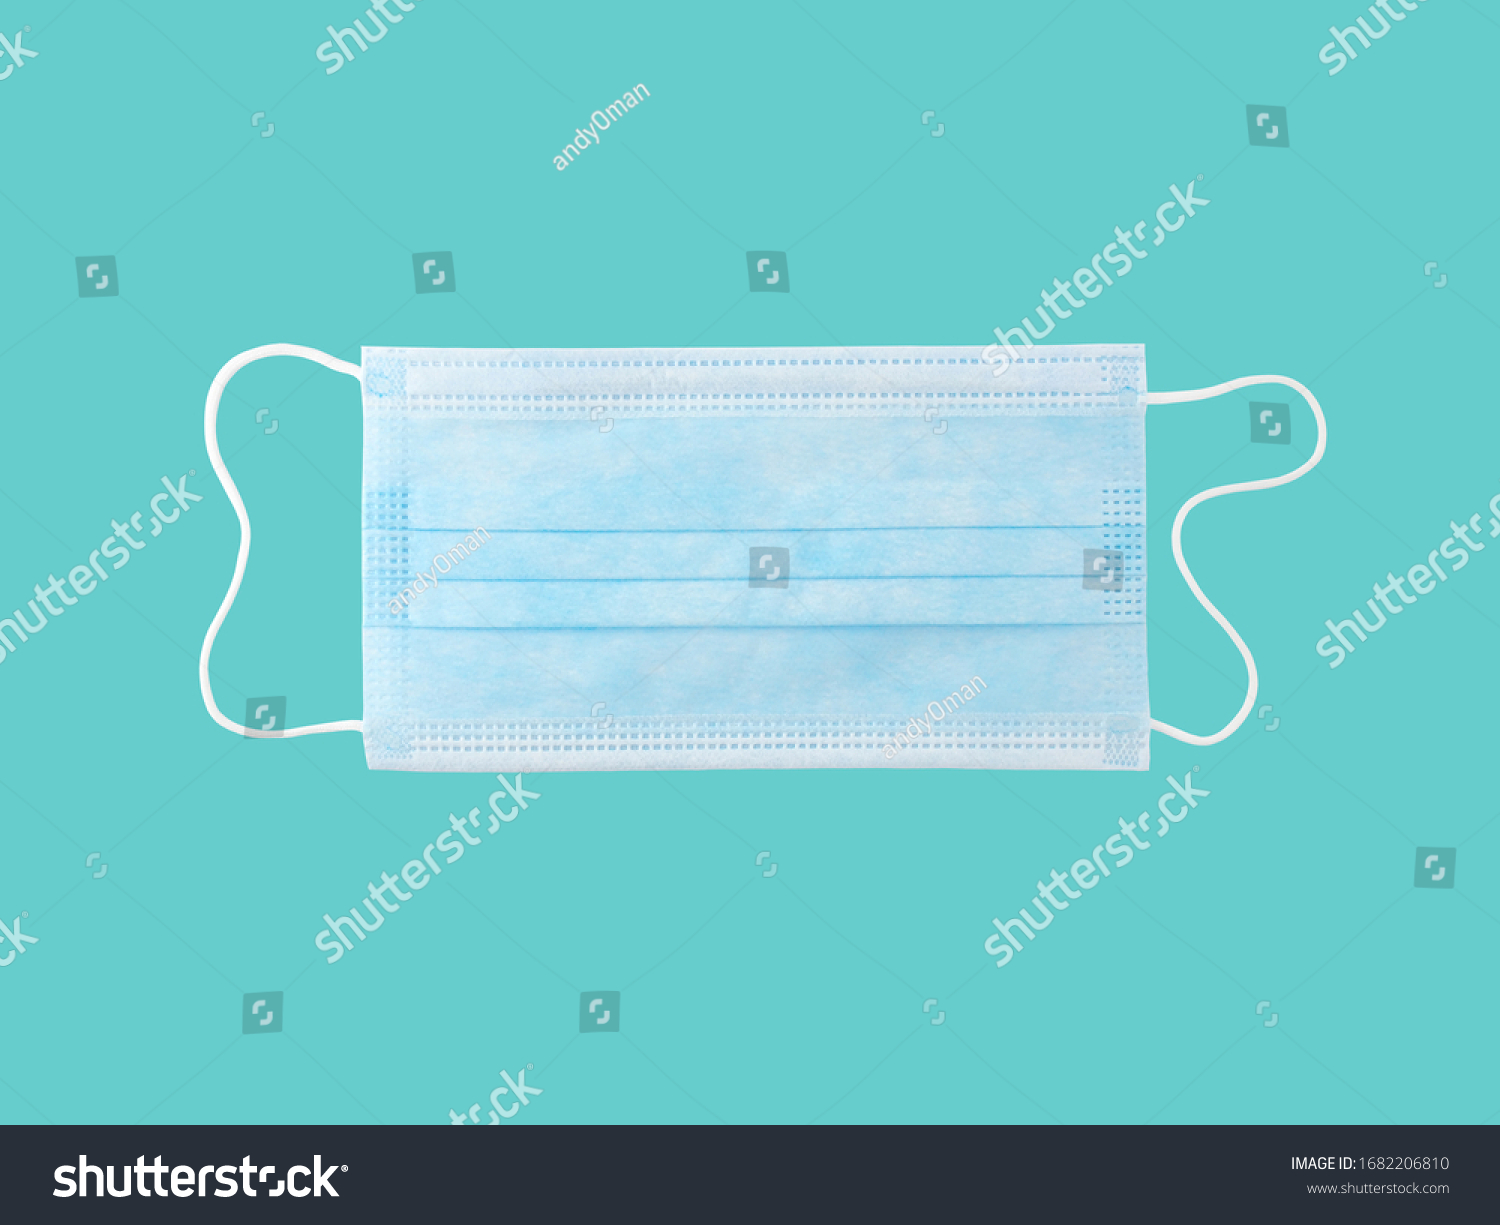 close up single light blue surgical mask (medical face mask) with white rope strap for prevent germs while performing surgery or protective coronavirus (COVID-19) outbreak isolated on cyan background #1682206810